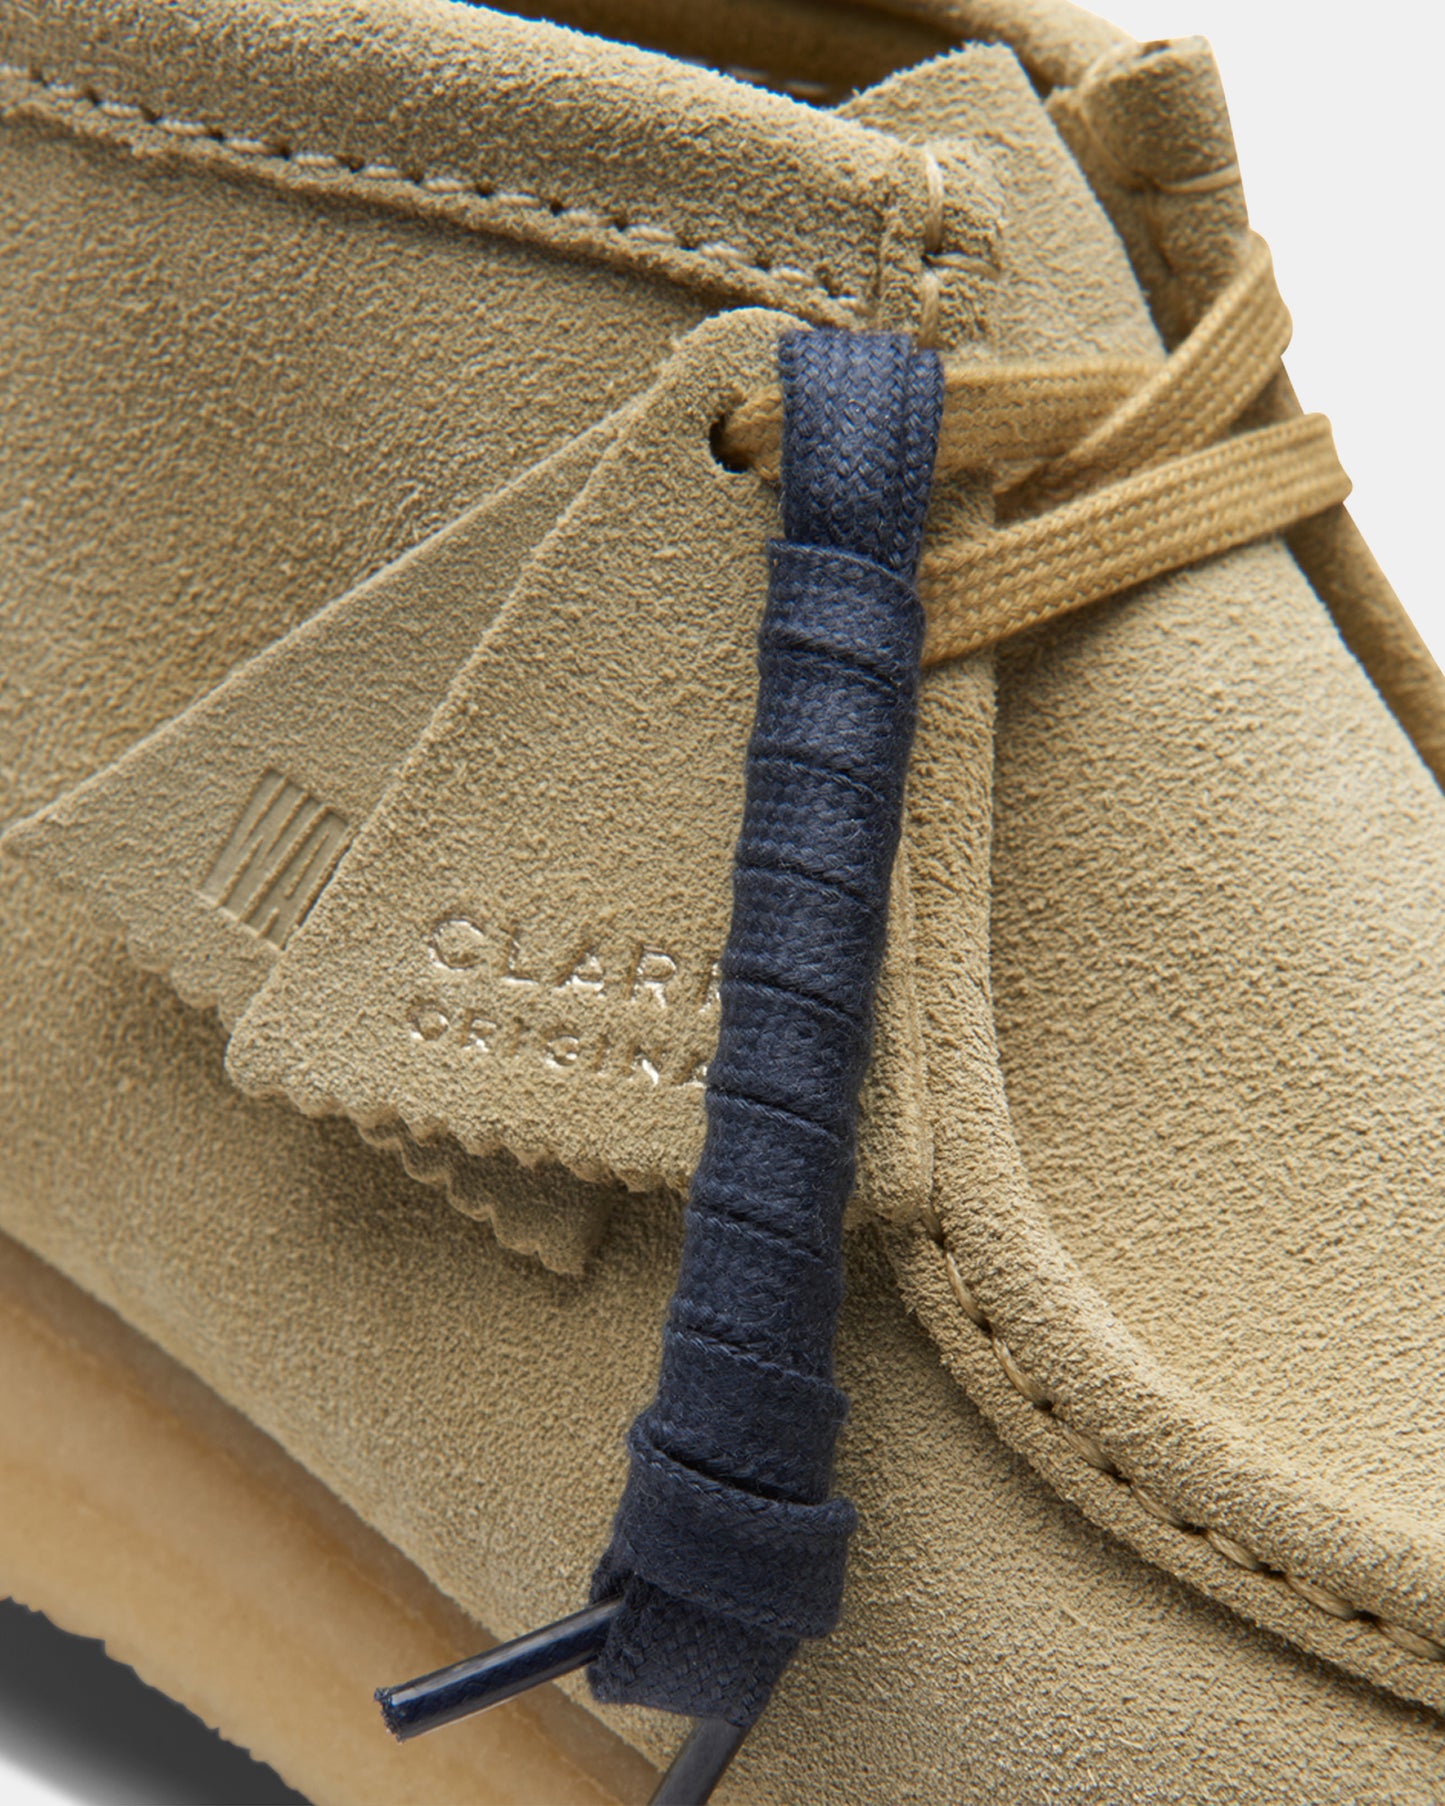 Wallabee Boot. (W) Maple Suede